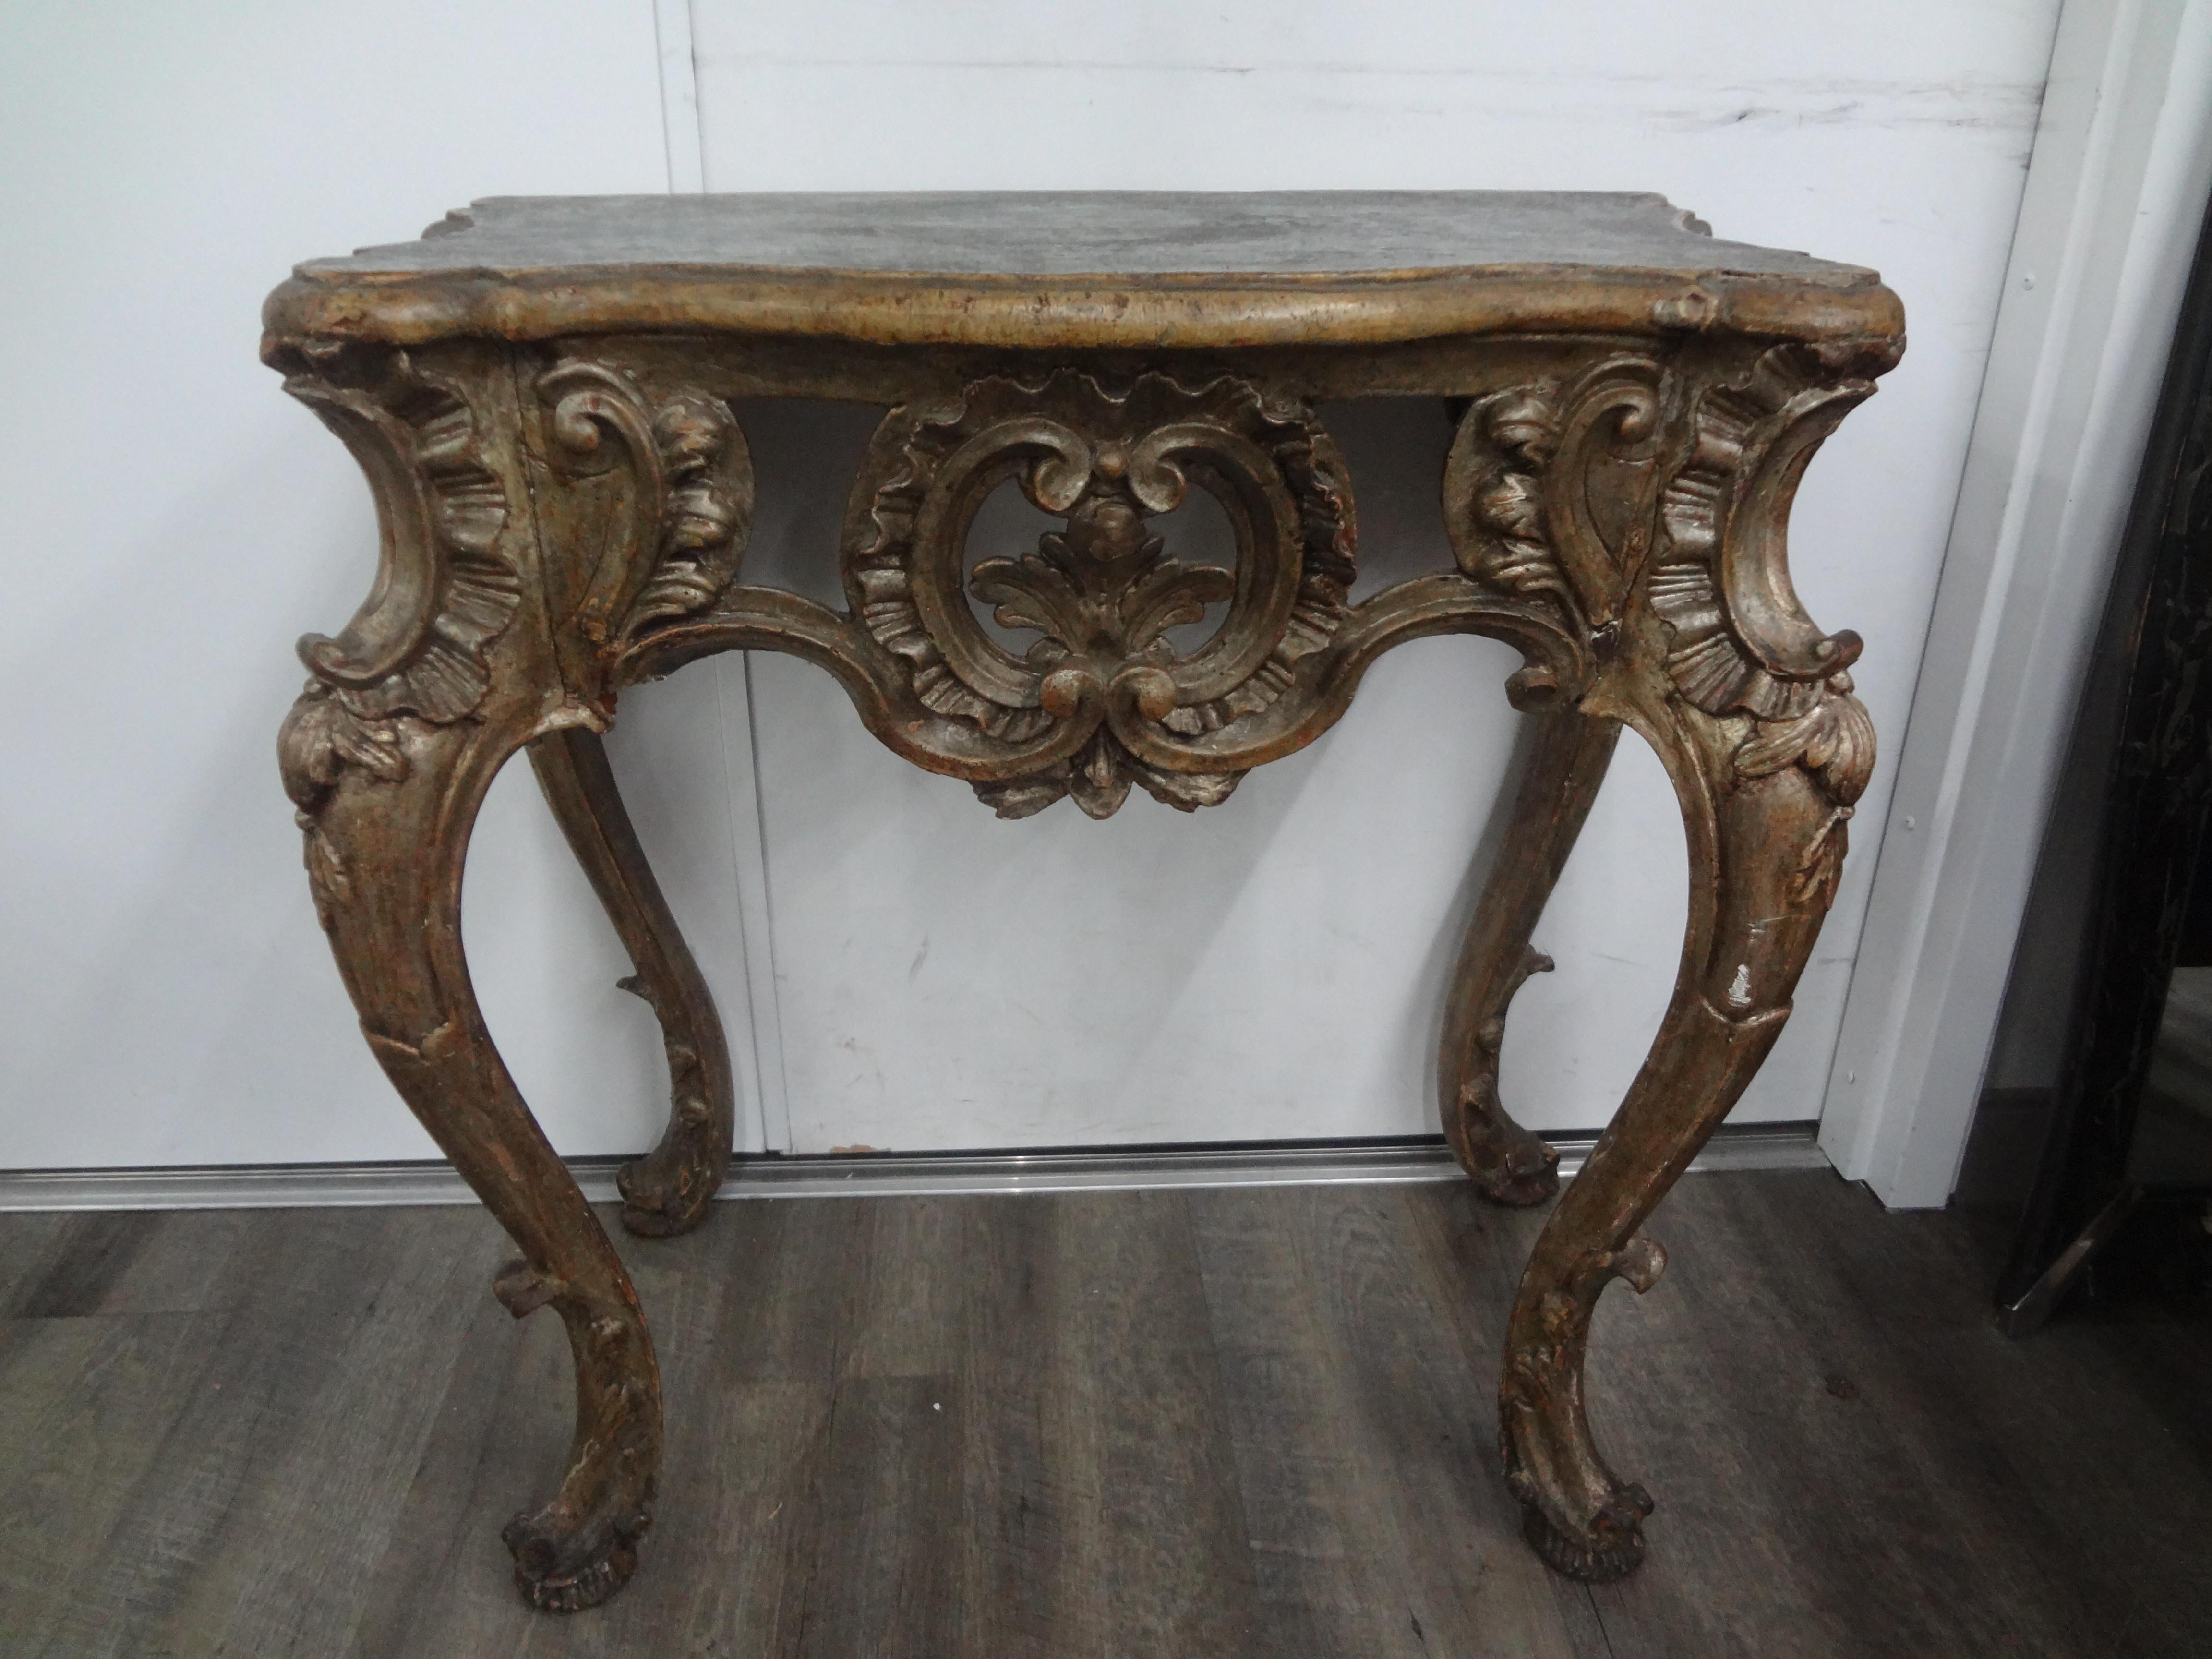 Pair Of 18th Century Italian Baroque Giltwood Console Tables.
Our stunning Italian Baroque gilt wood console tables are free standing and come from the Tuscany region.
Gorgeous!